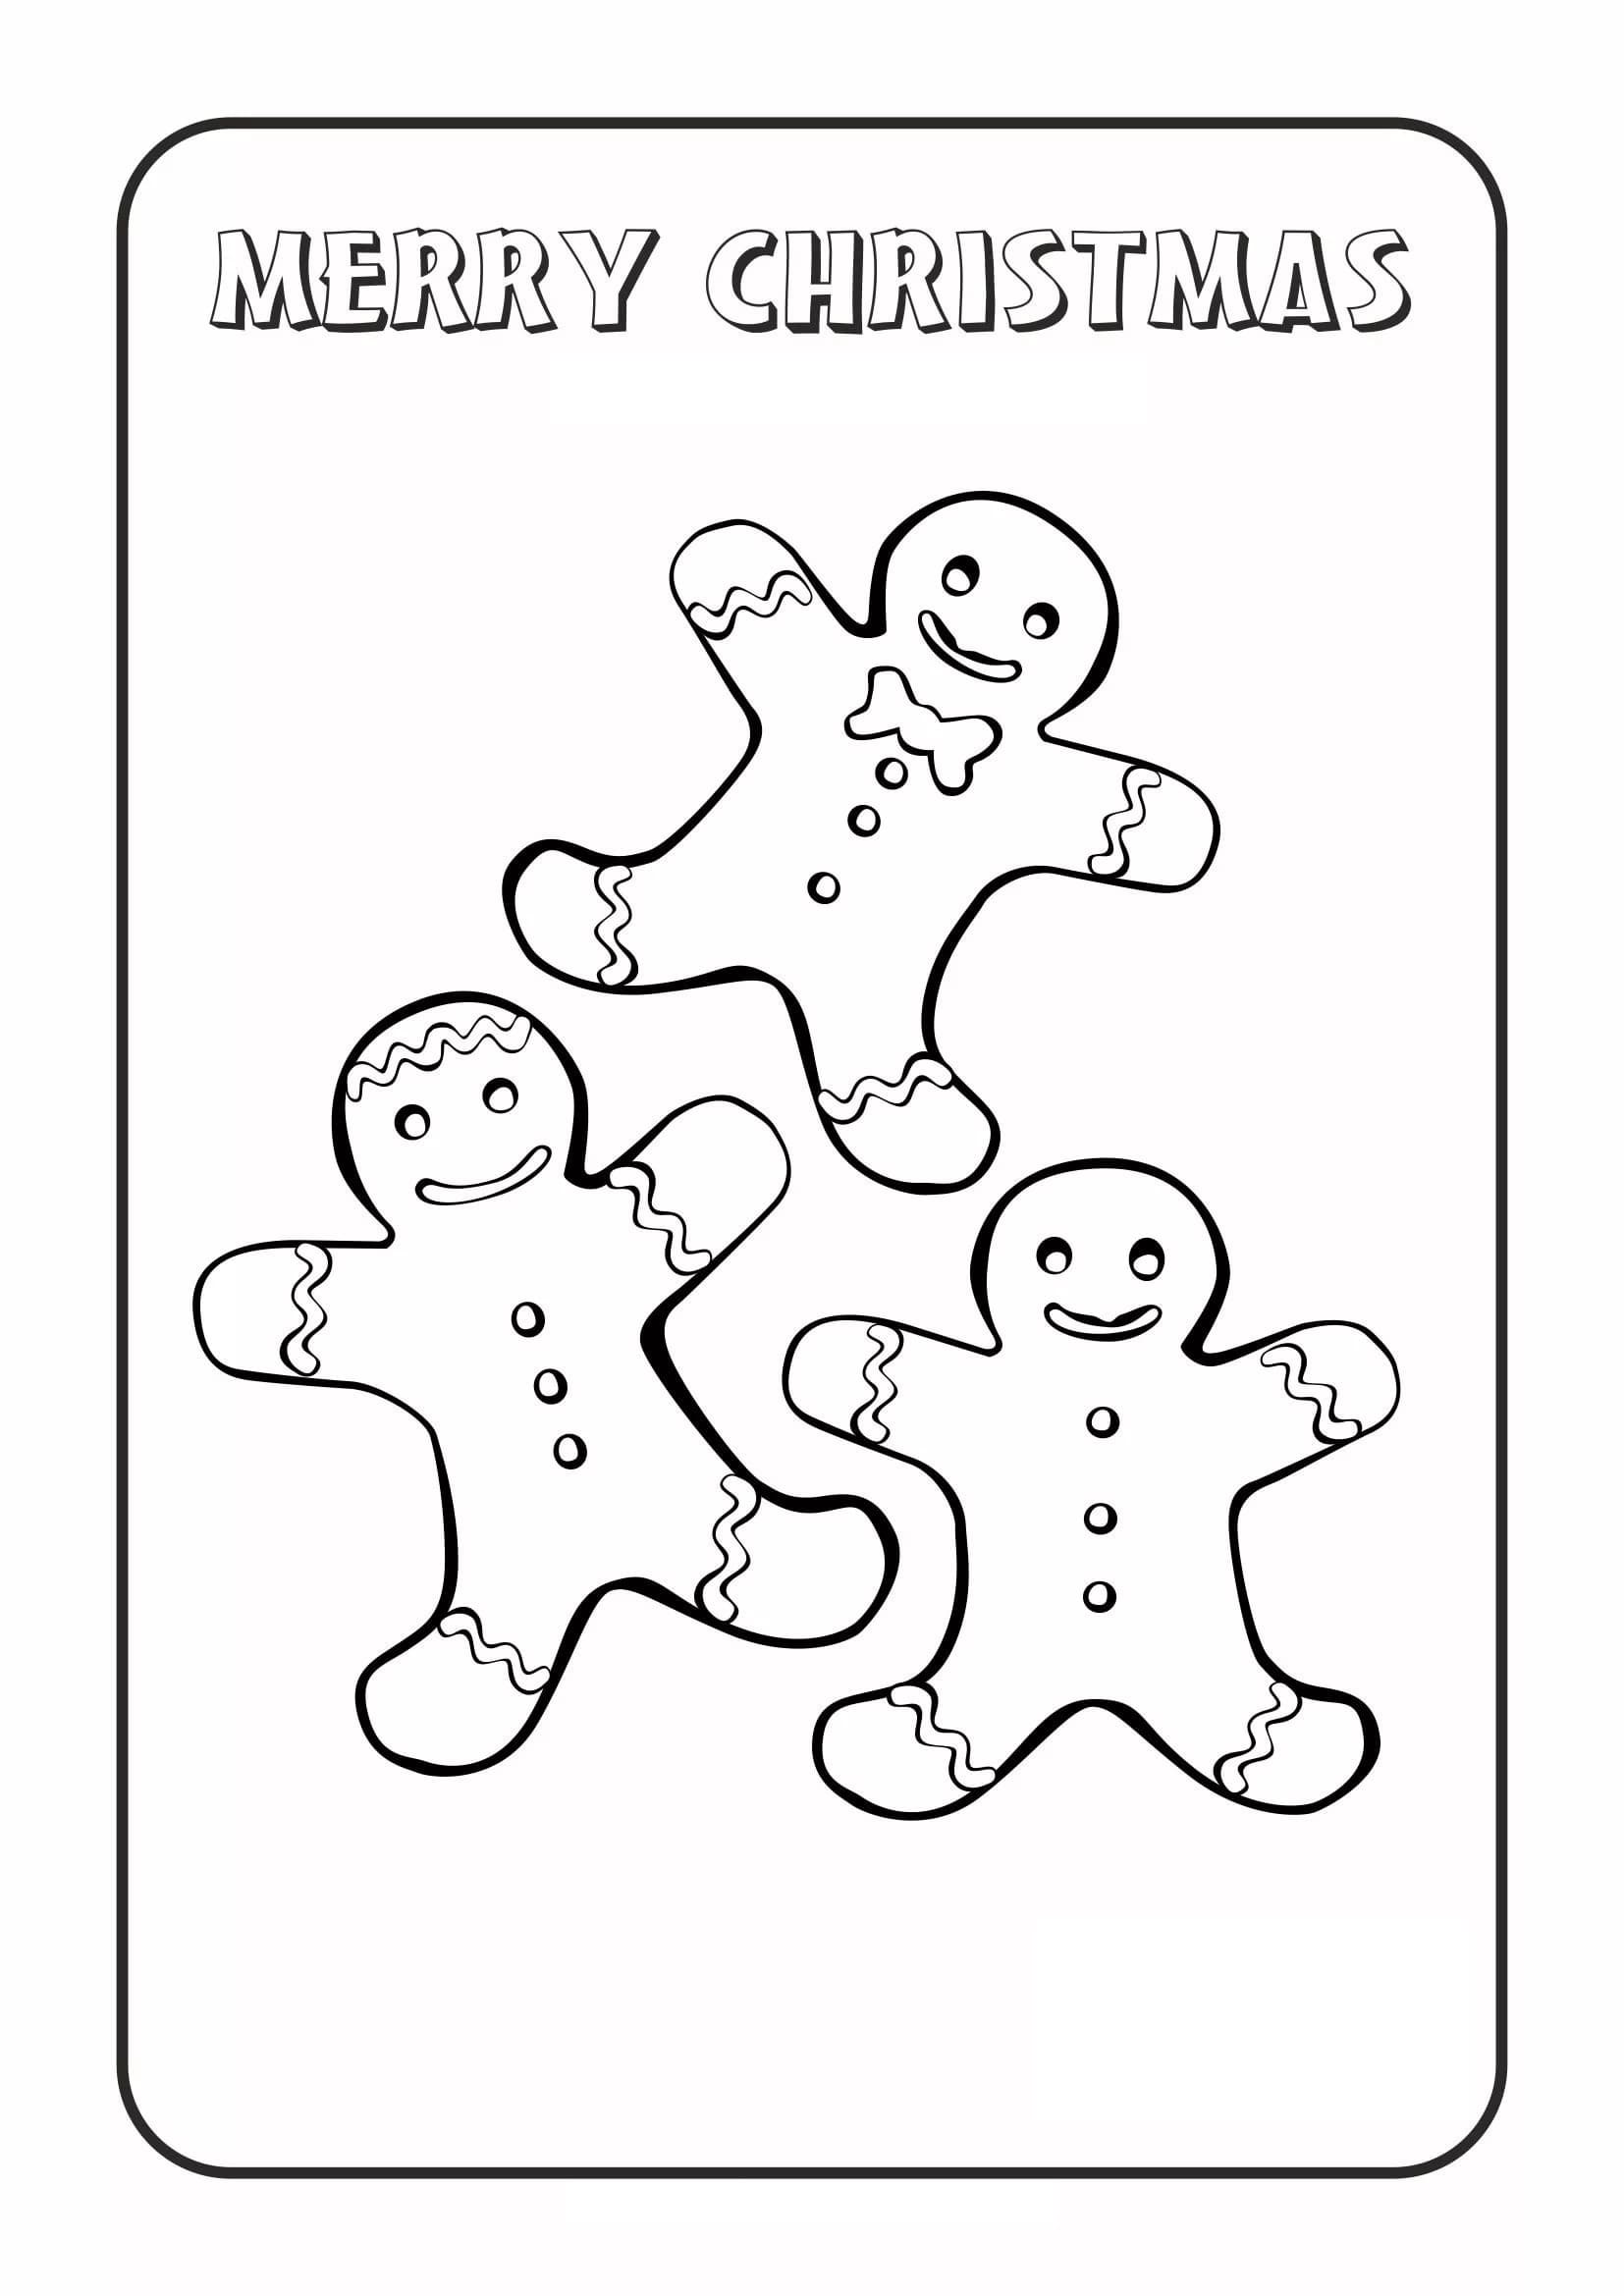 Gingerbread Man Coloring Pages. 70 New Images Free Printable